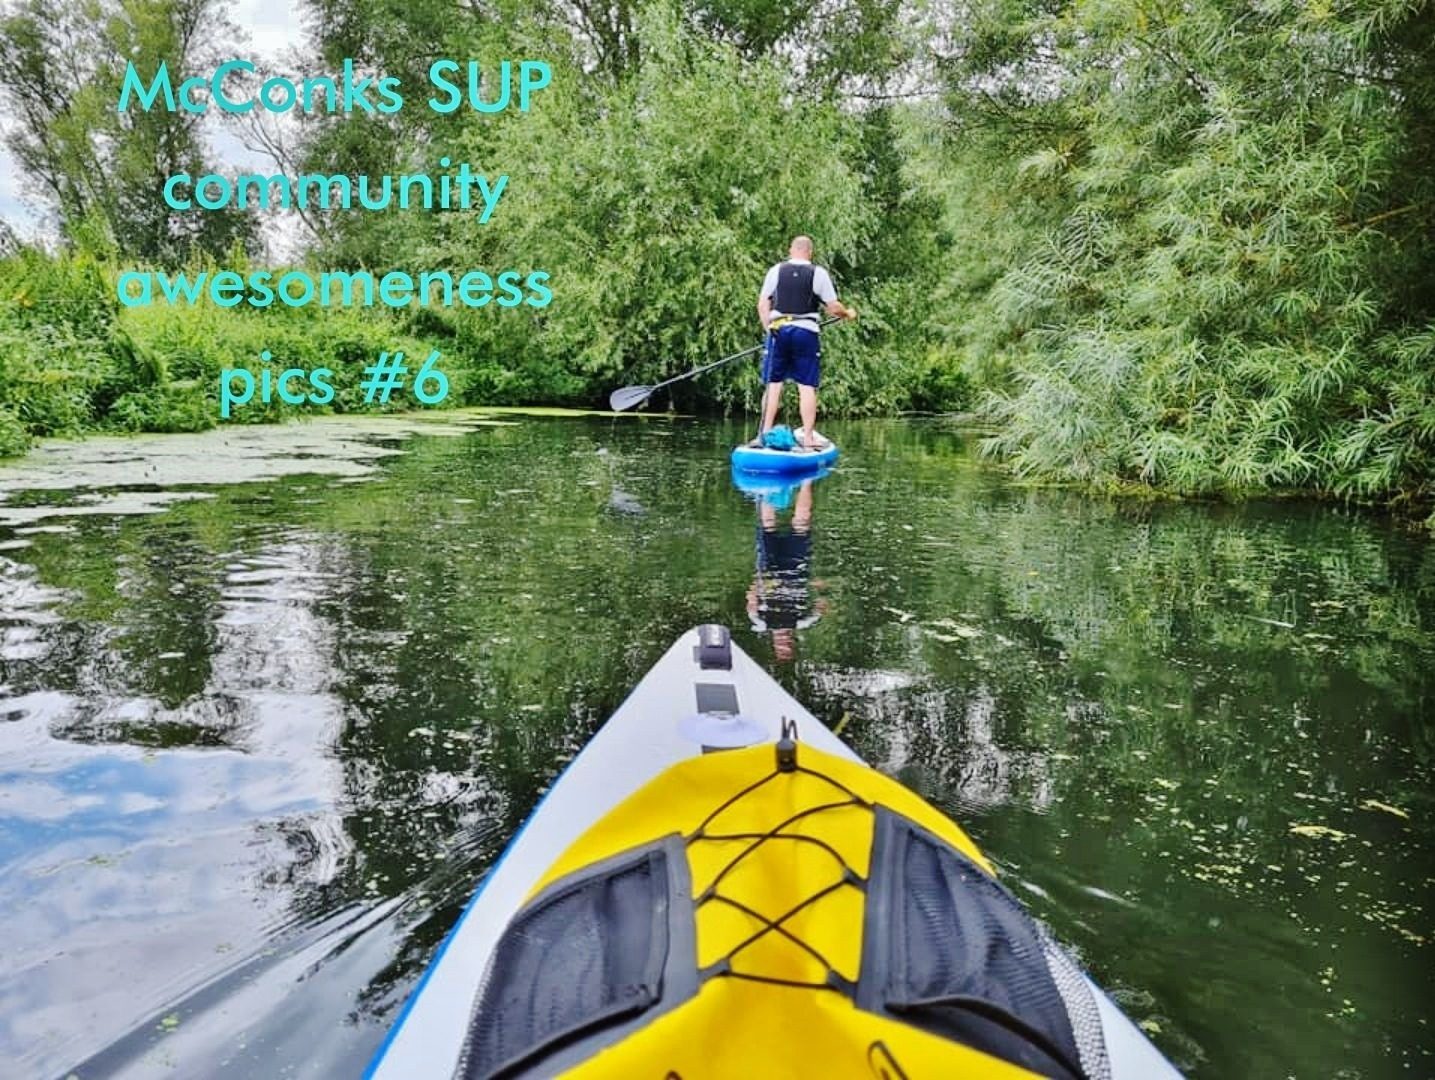 You are currently viewing McConks SUP community awesomeness pics #6